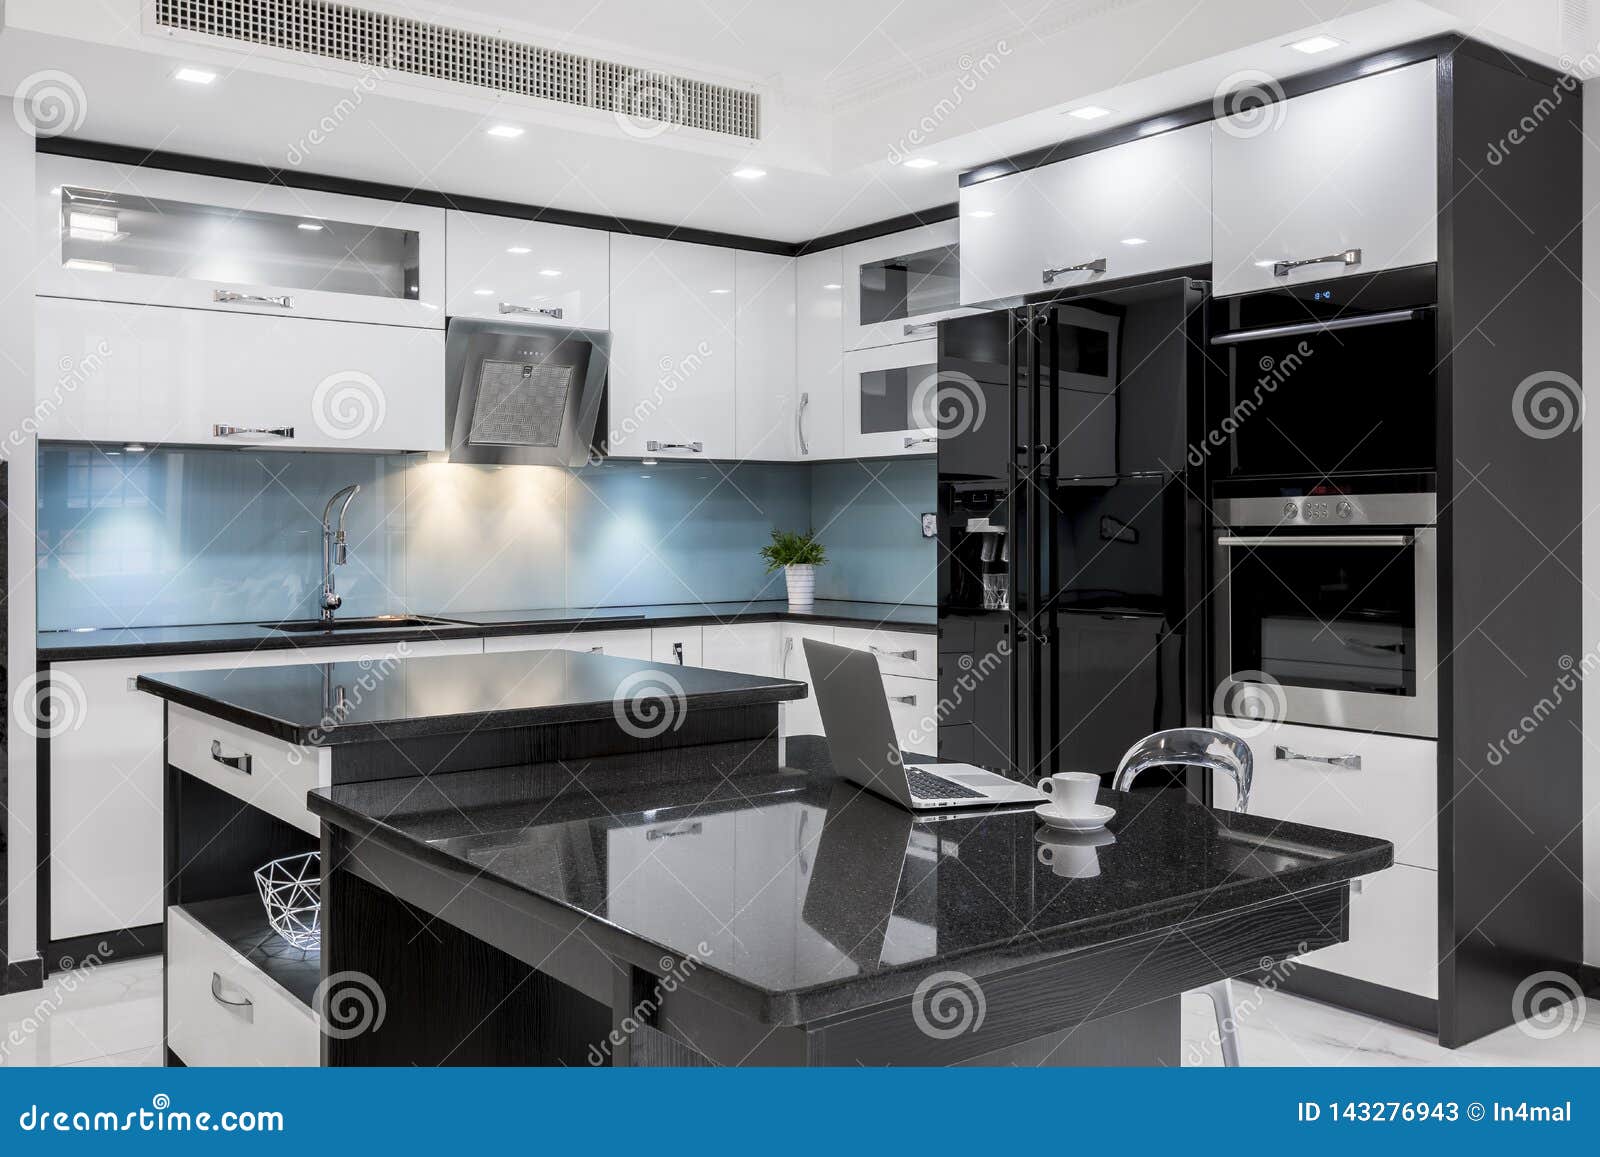 Black And White Modern Kitchen Stock Image Image Of Computer